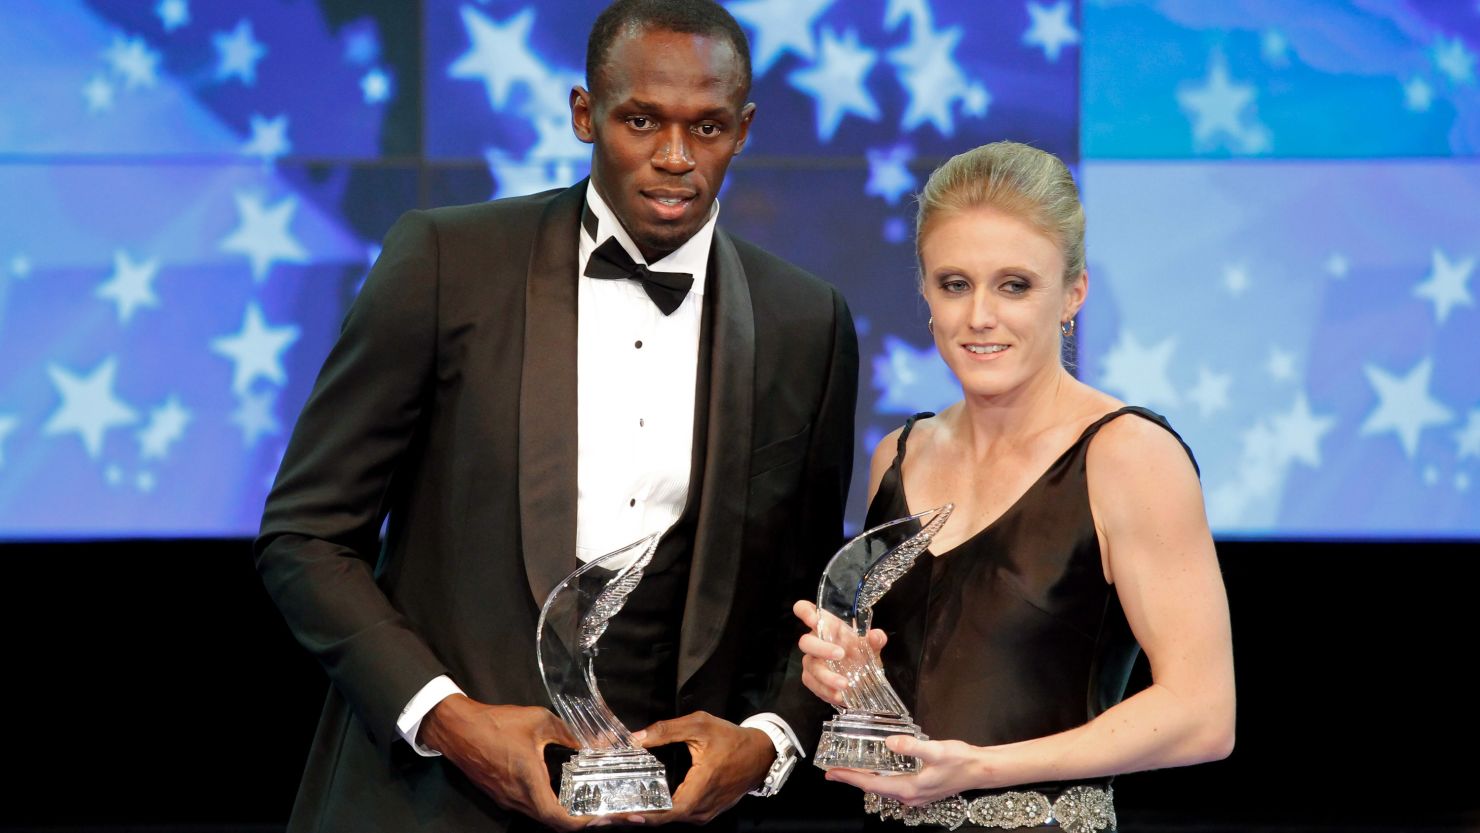 Usain Bolt was named the IAAF's male athlete of the year, with South Africa's Sally Pearson winning the women's award.